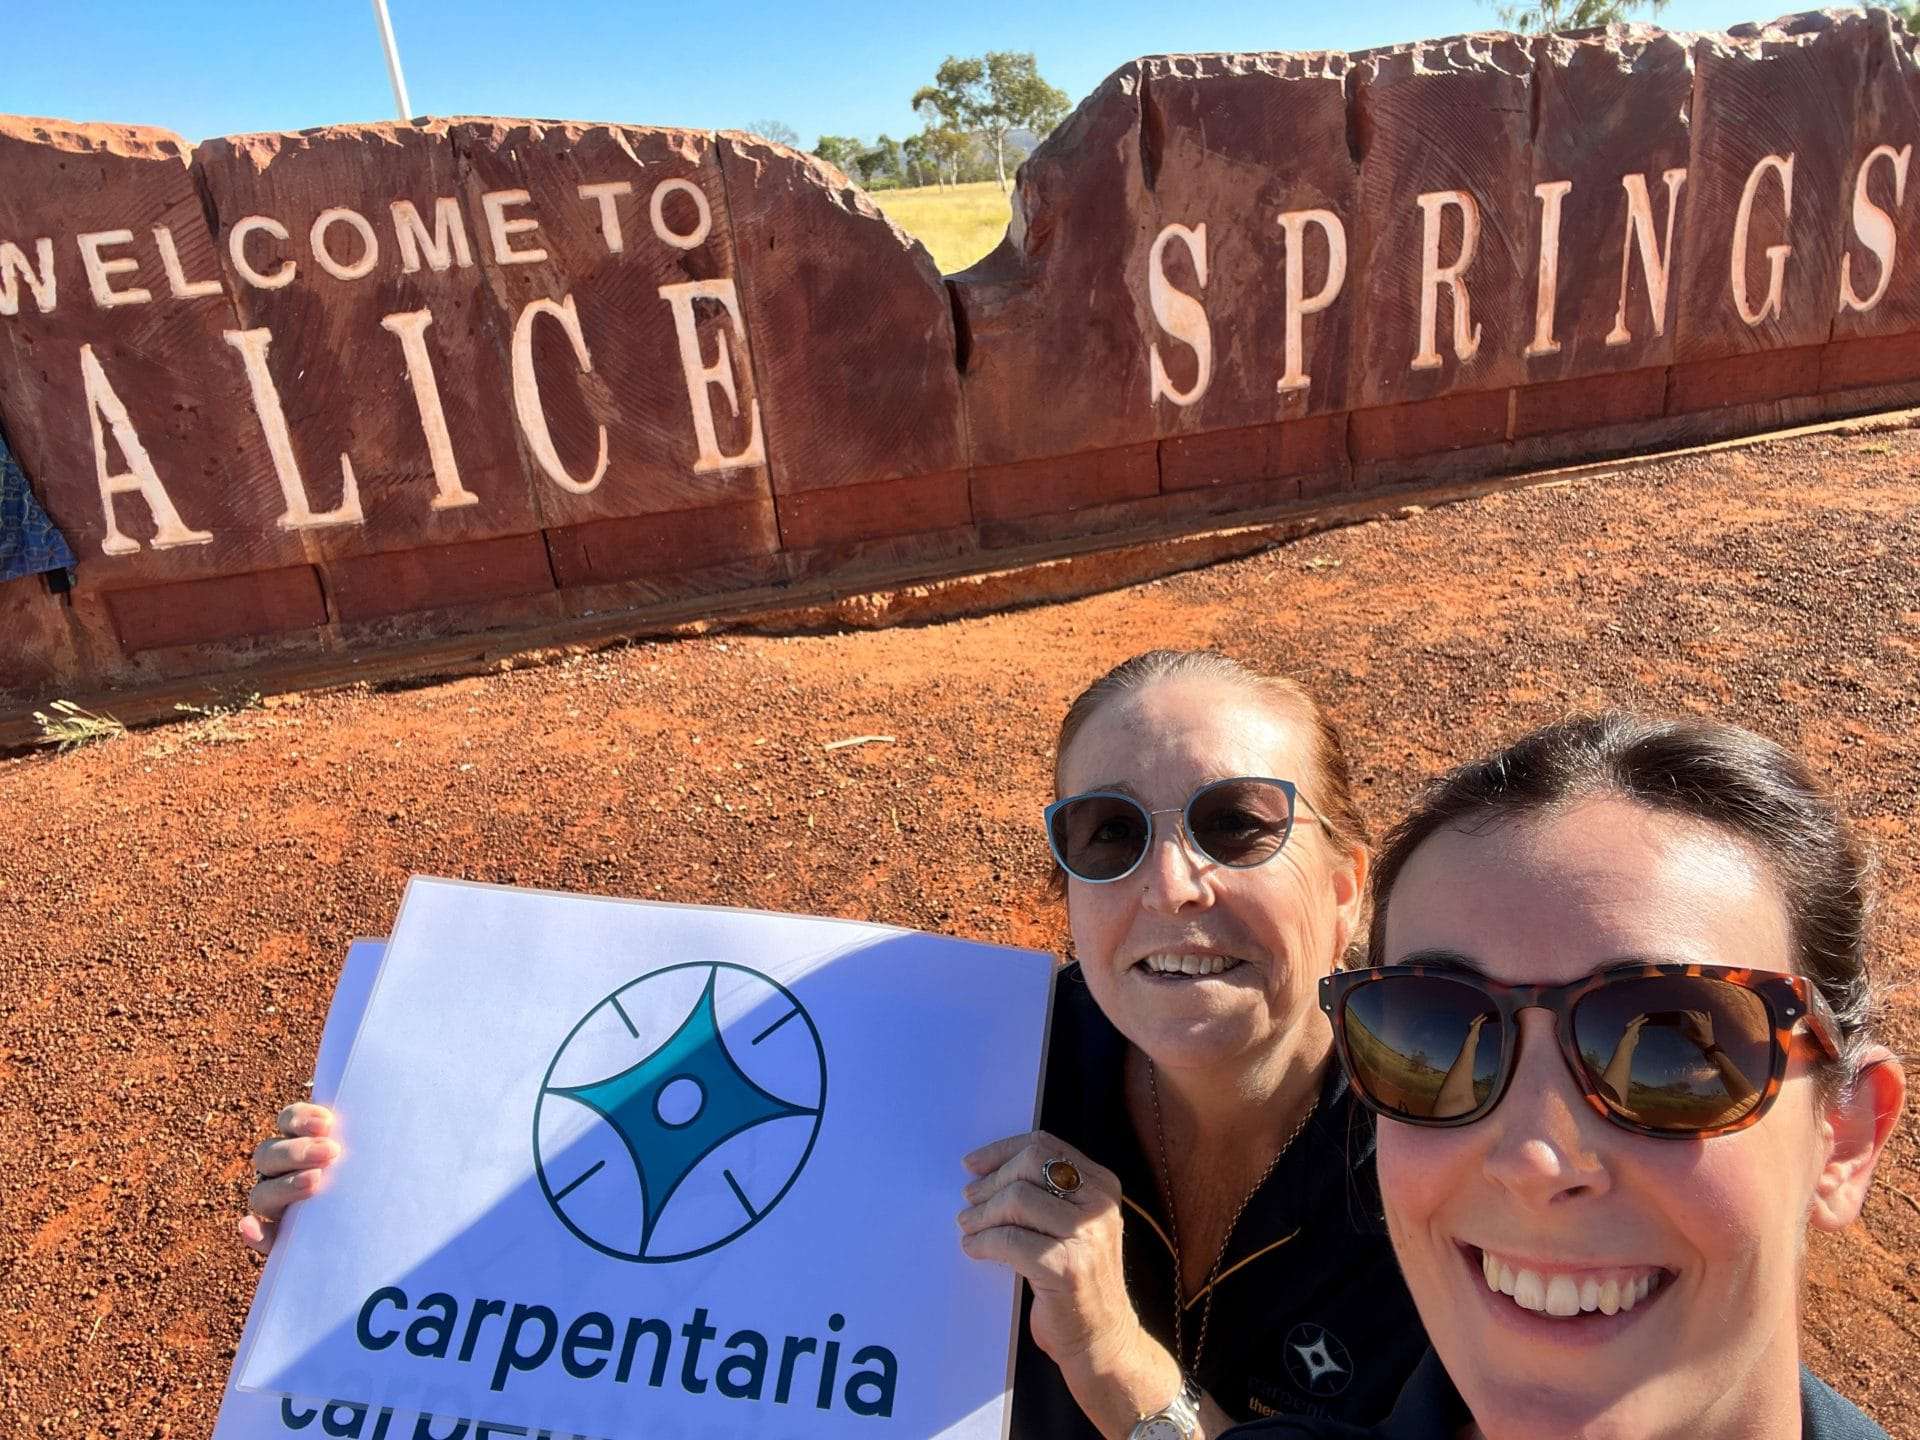 Two Carpentaria staff members in front of a sign which says Welcome to Alice Springs